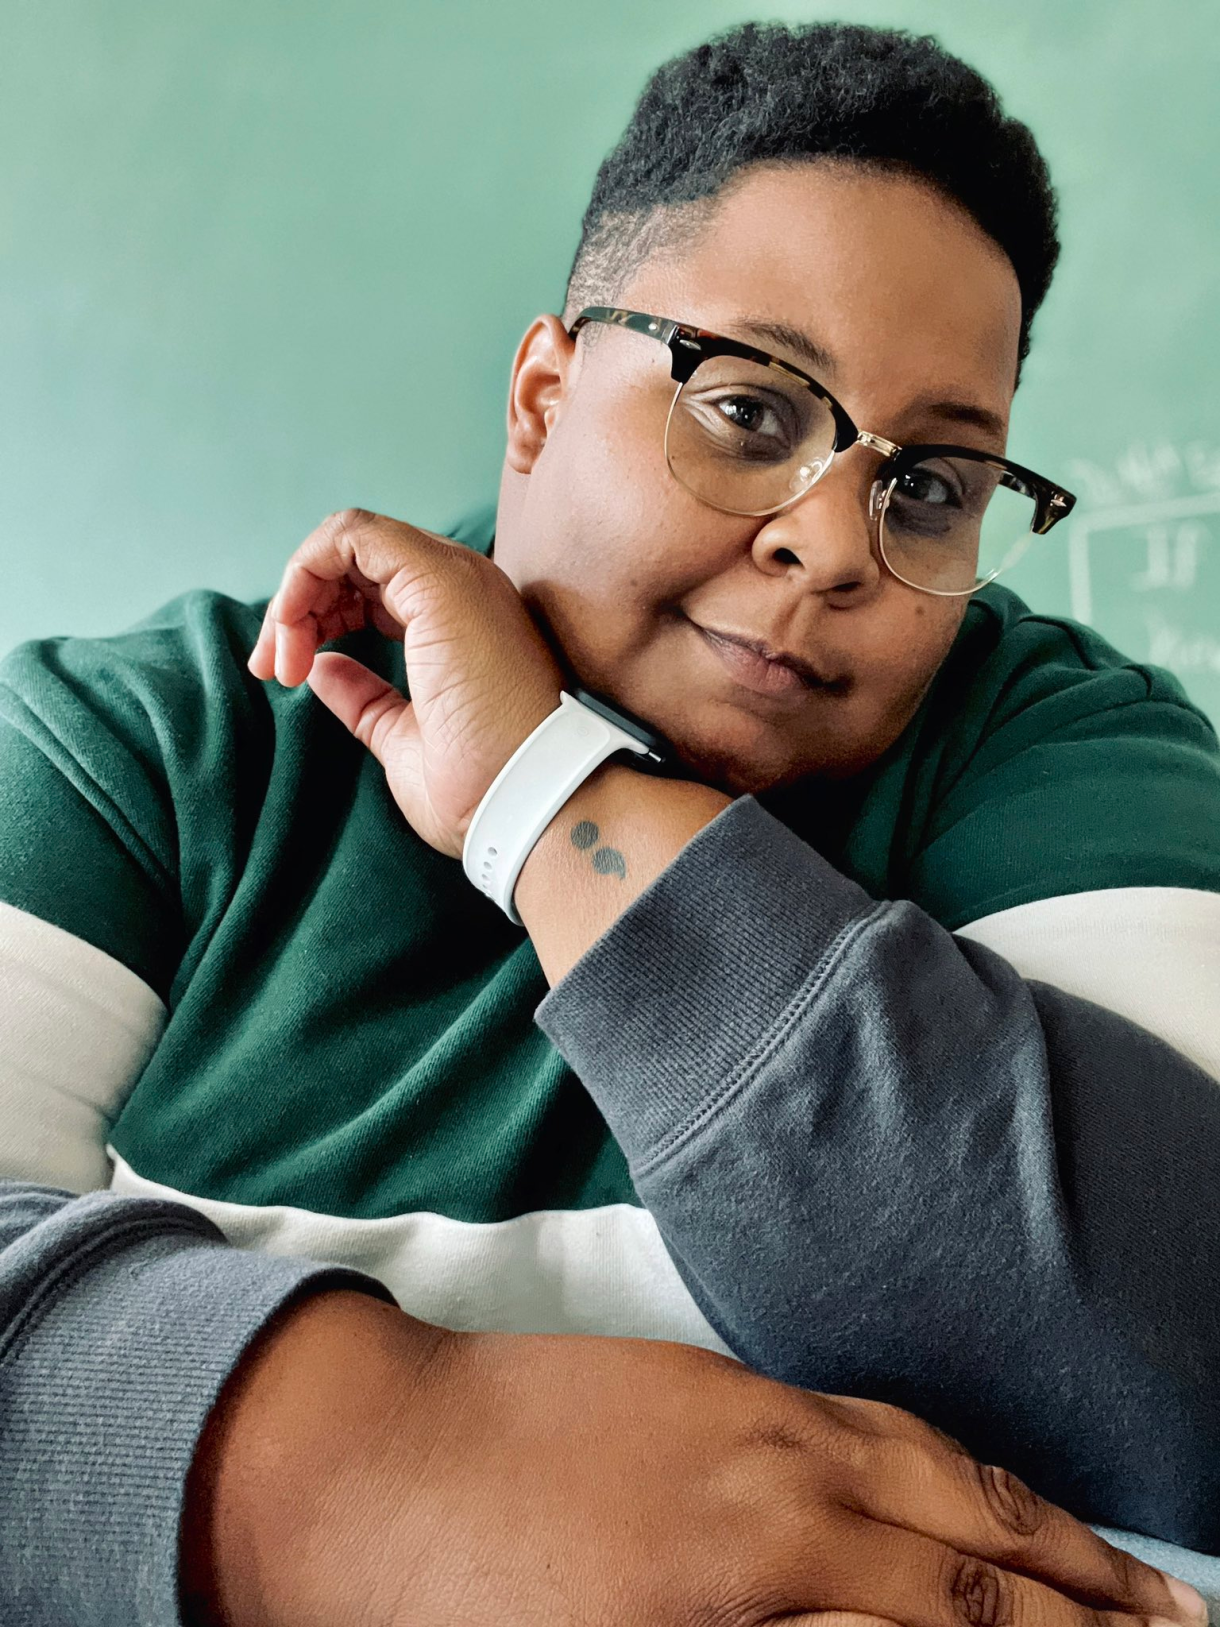 a photo of shea, a Black nonbinary human with short hair, shaved on the sides, toroise shell glasses, a white watch, a semicolon tattoo on their wrist, wearing a green and white striped polo. they are looking thoughtfully at the camera.